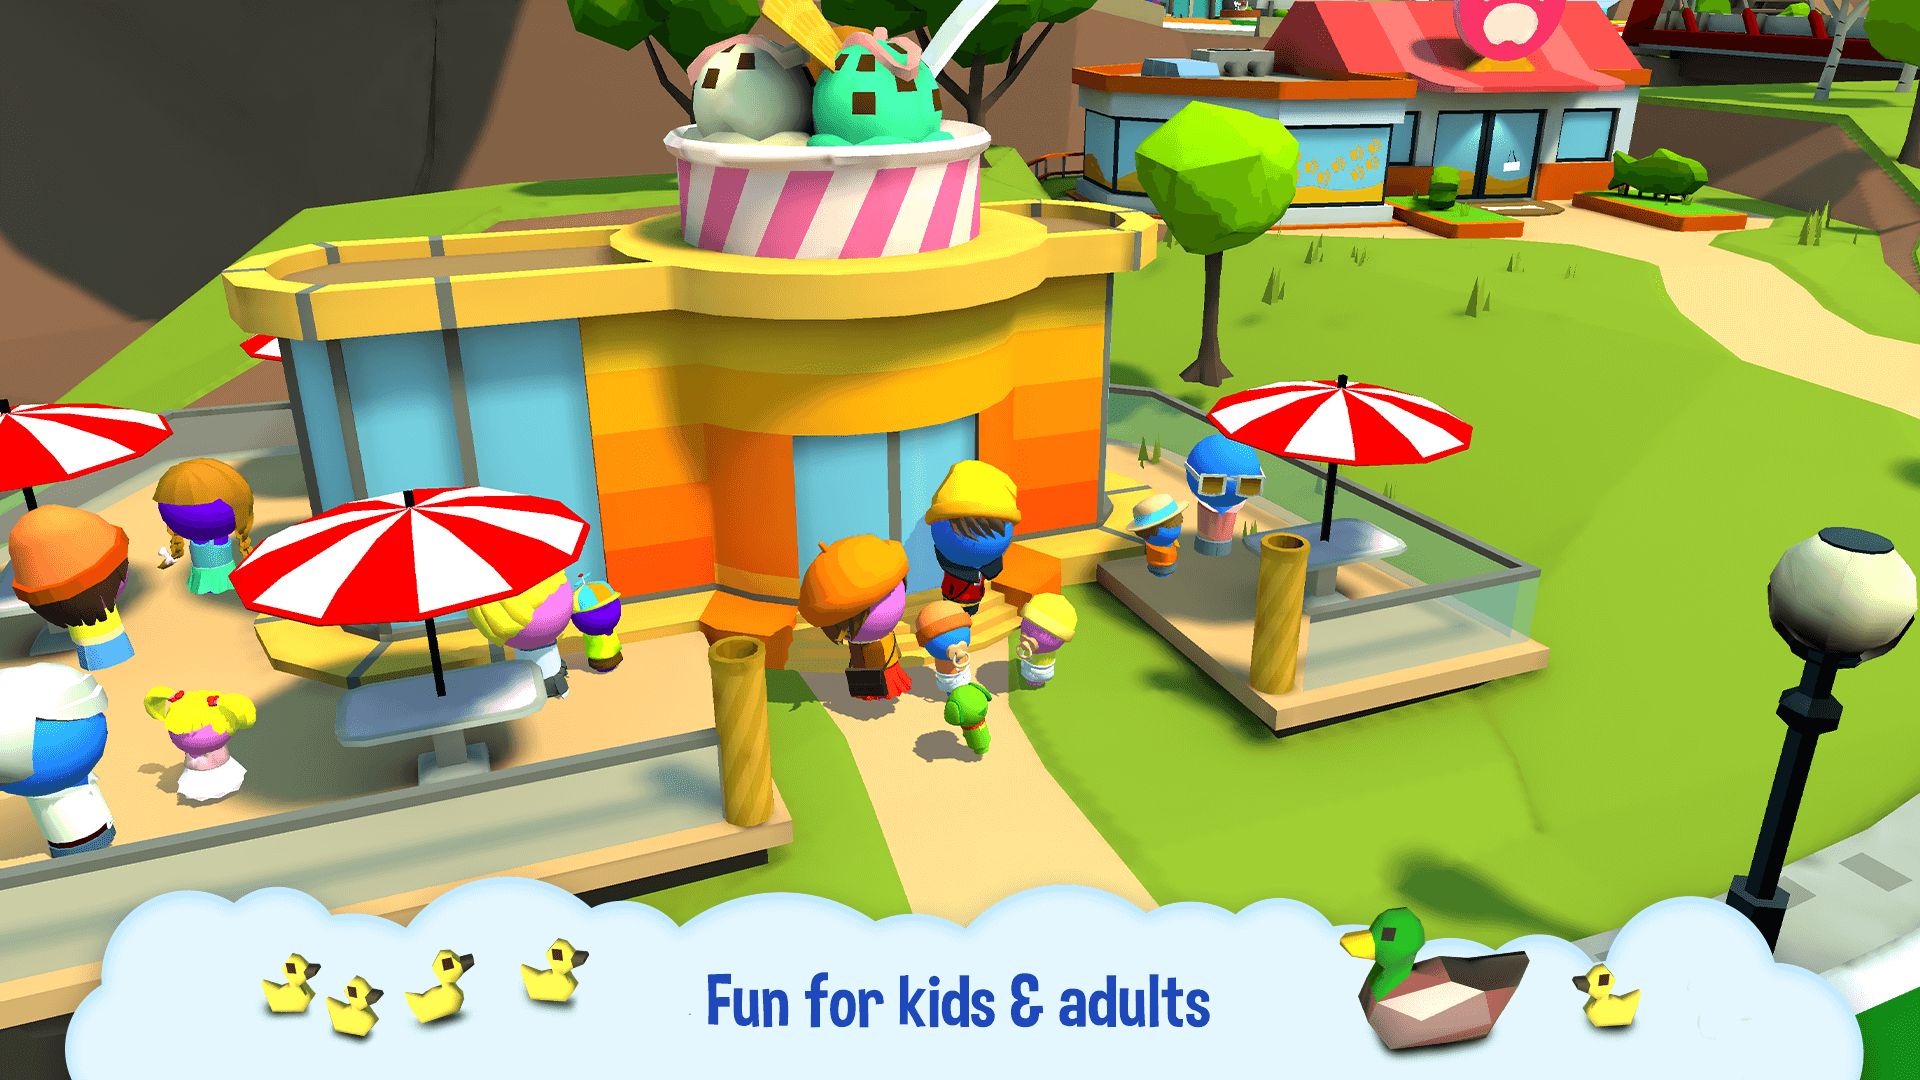 Download The Game of Life 2.2.7 APK For Android